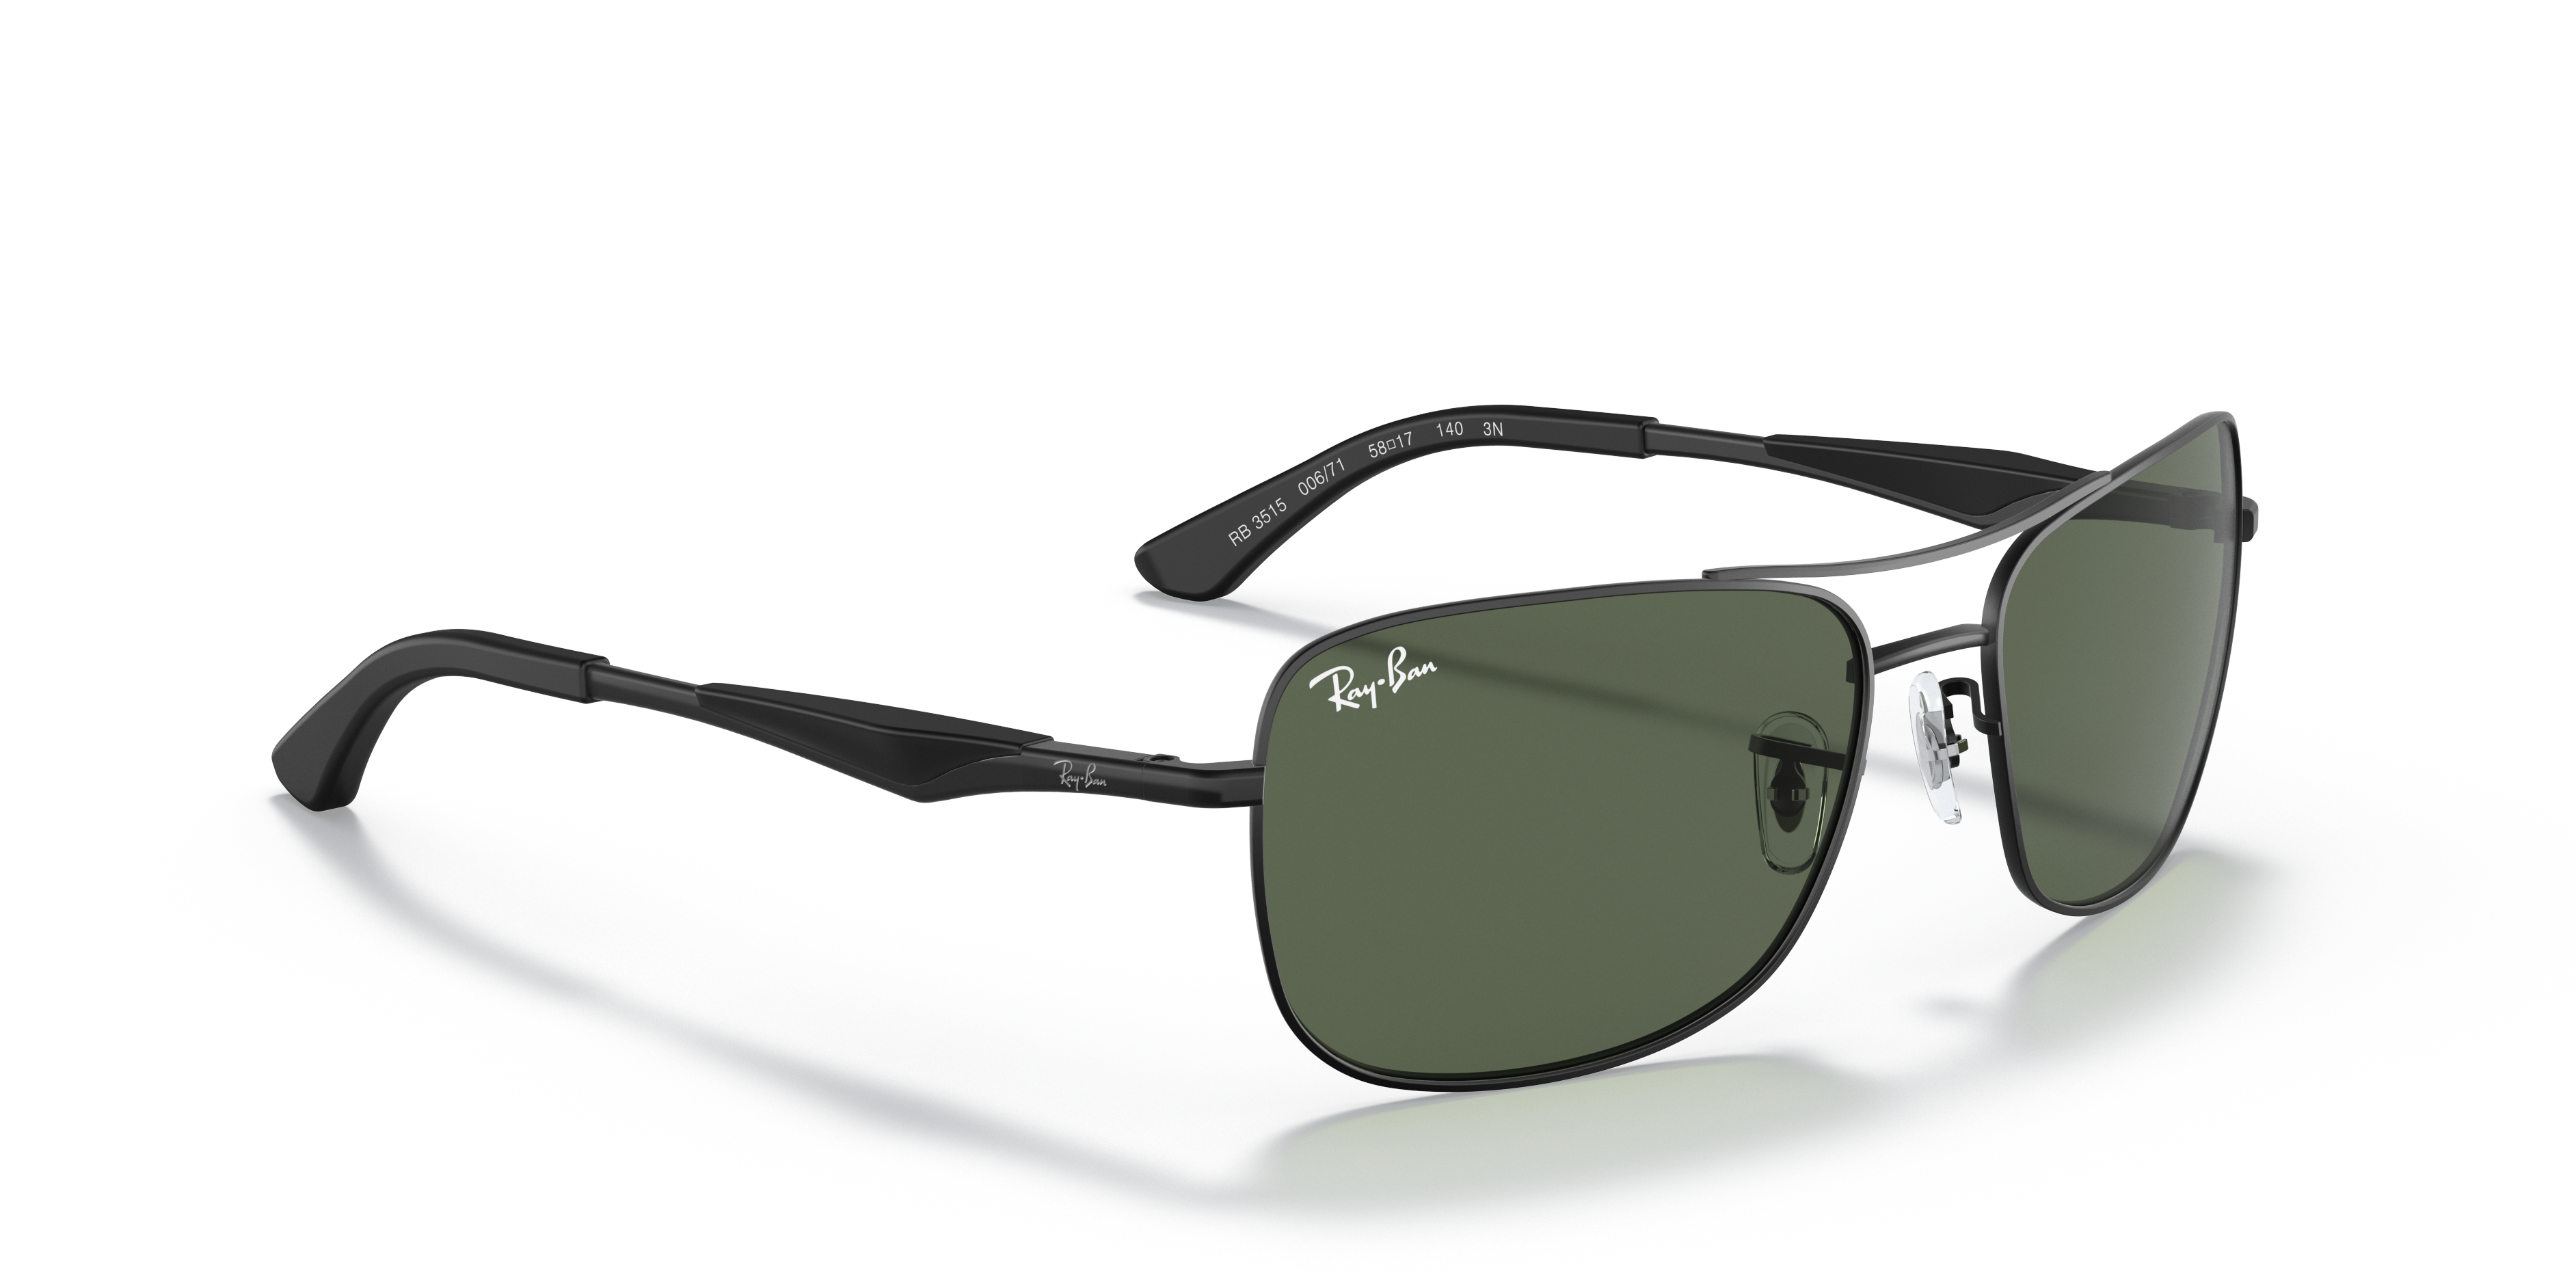 Rb3515 Sunglasses in Black and Green | Ray-Ban®